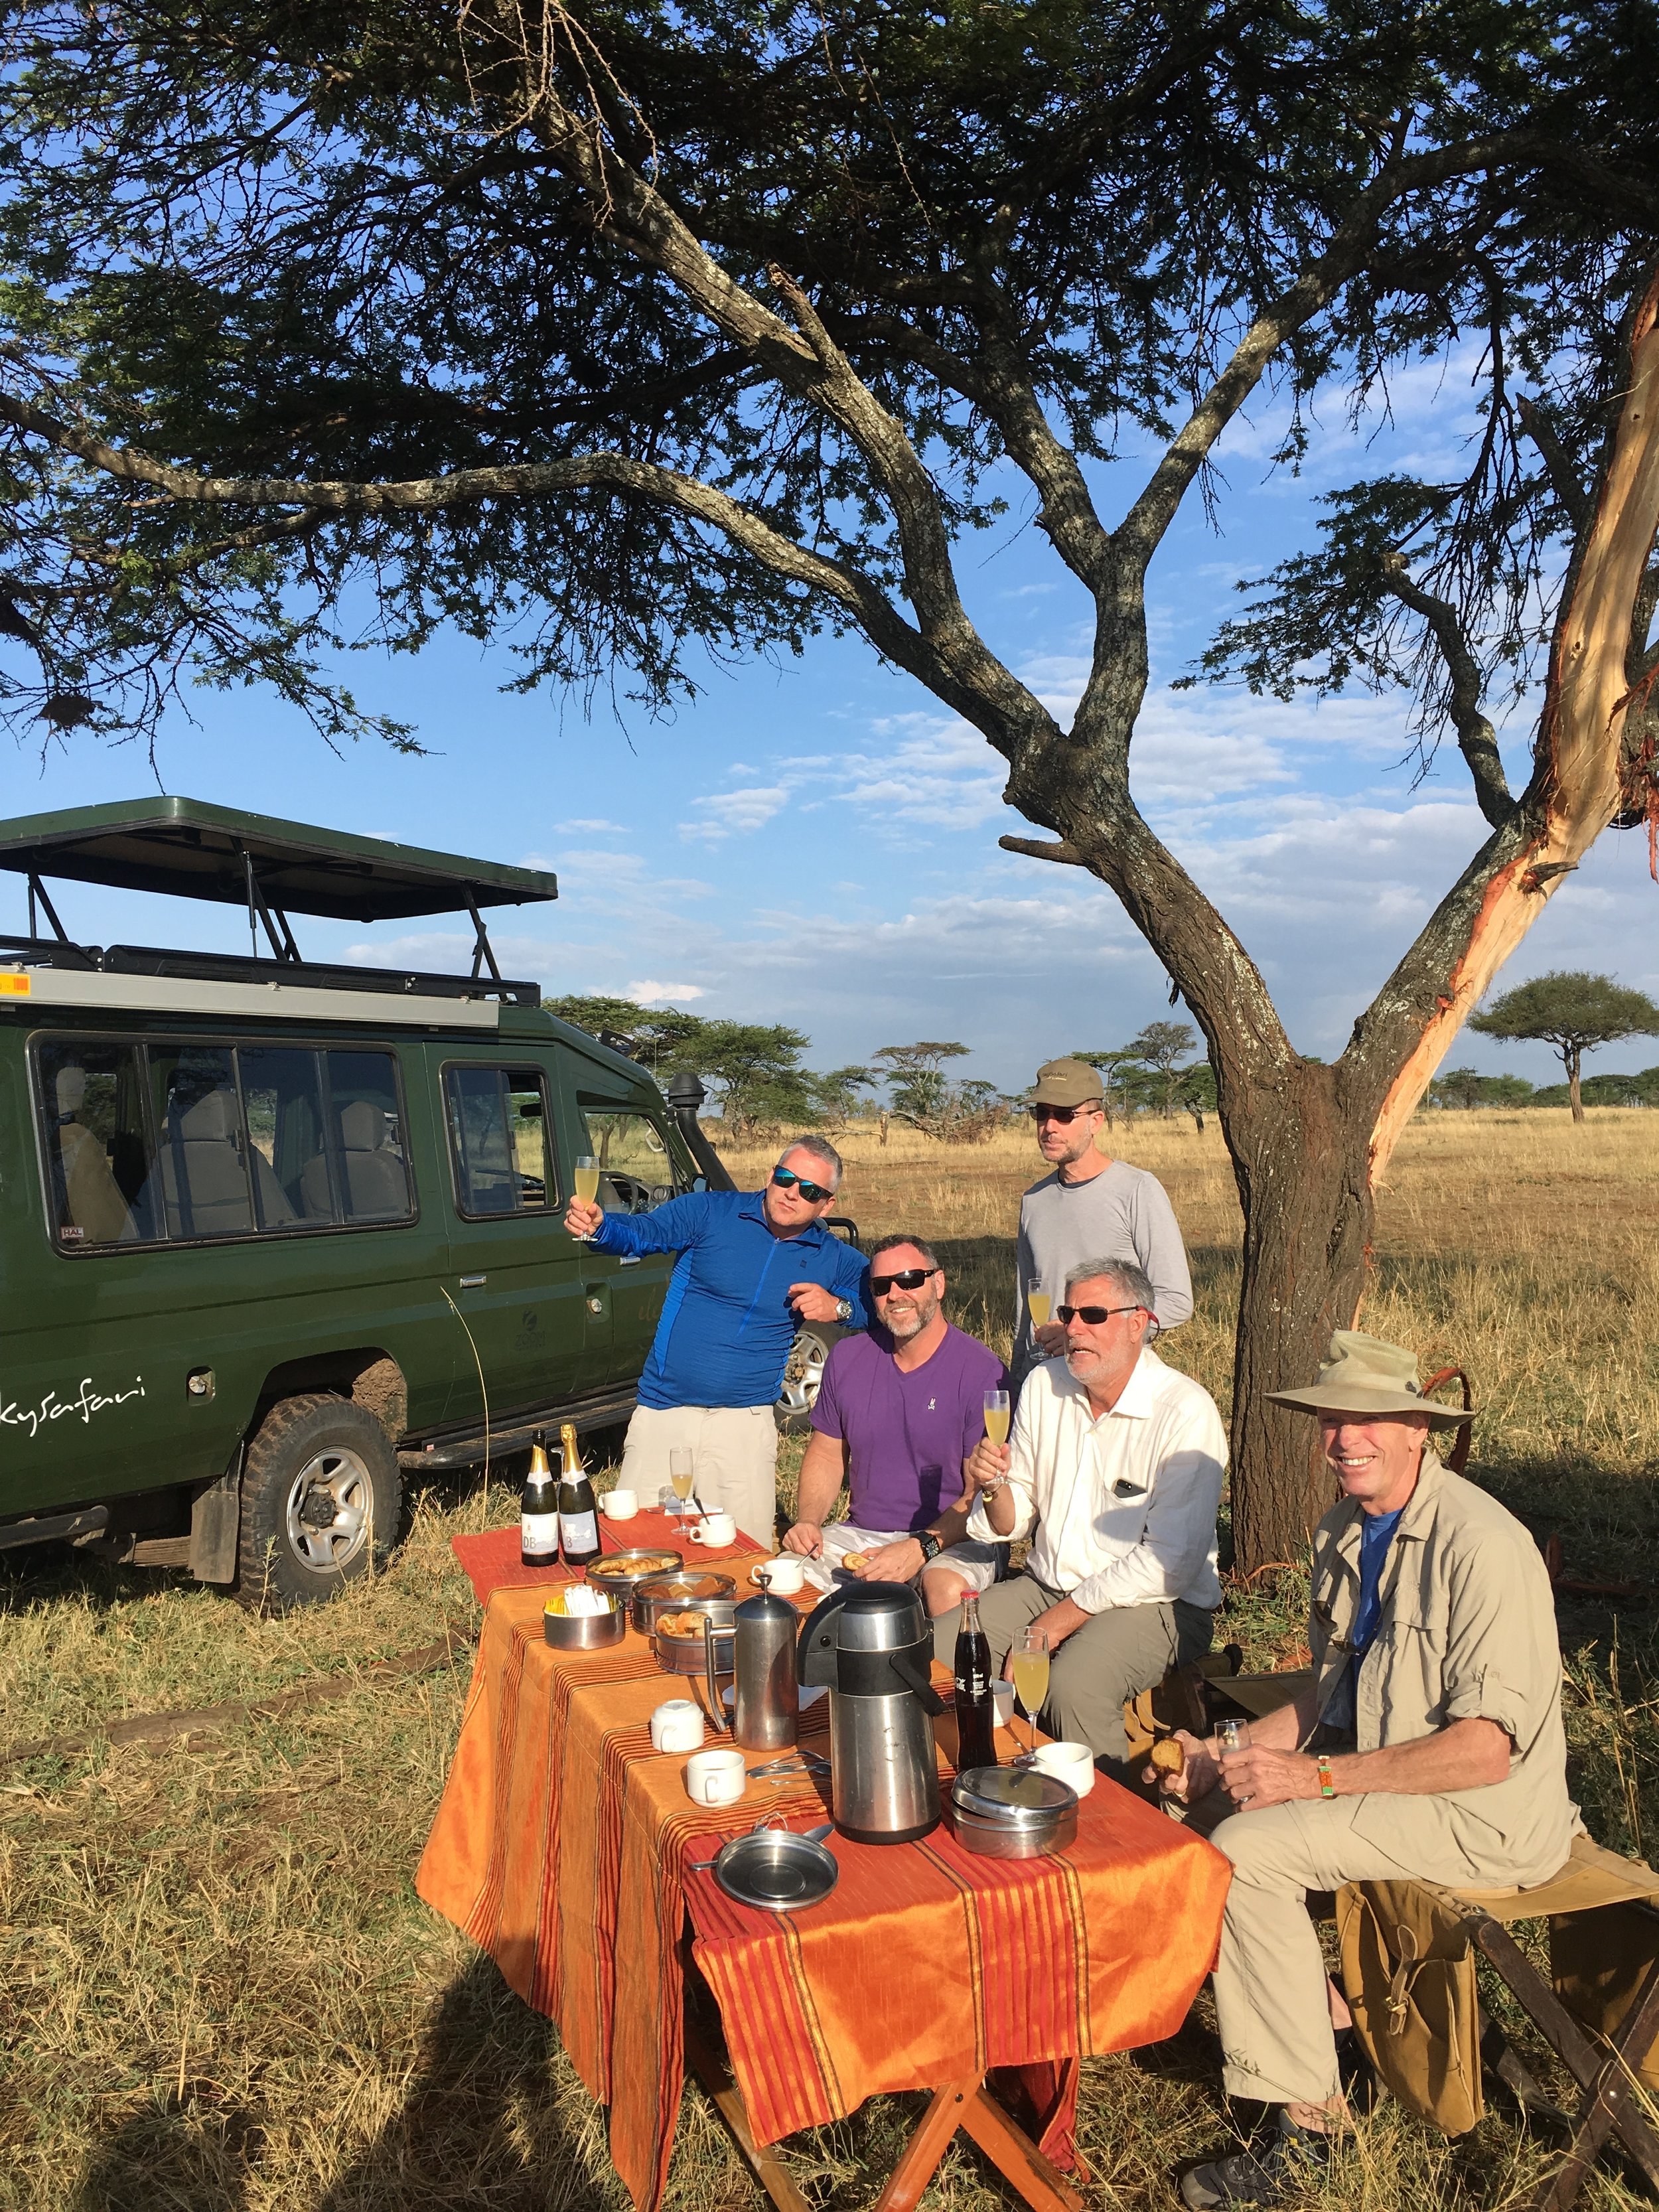 Staying well-nourished while on safari.